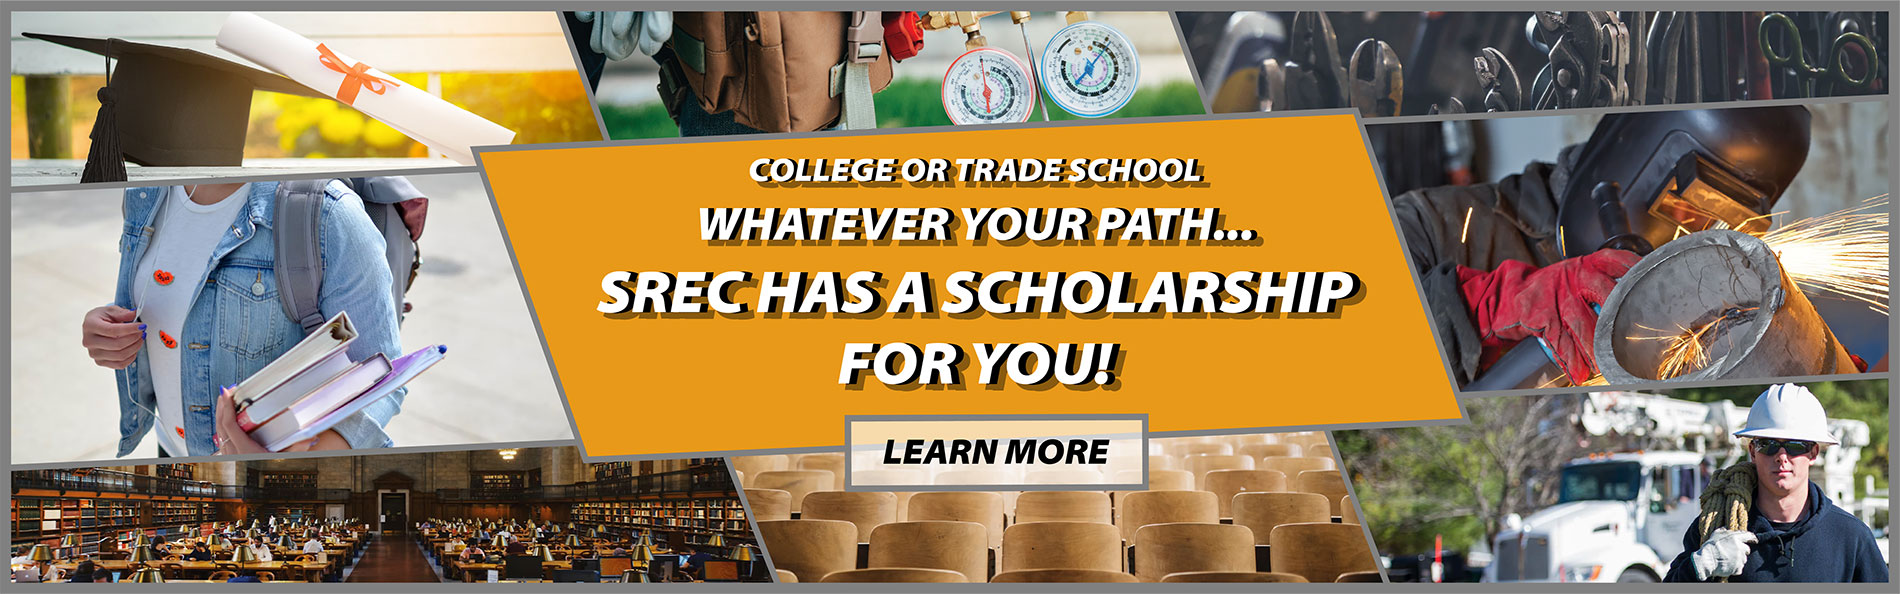 College or trade school, whatever your path... SREC HAS A SCHOLARSHIP FOR YOU!